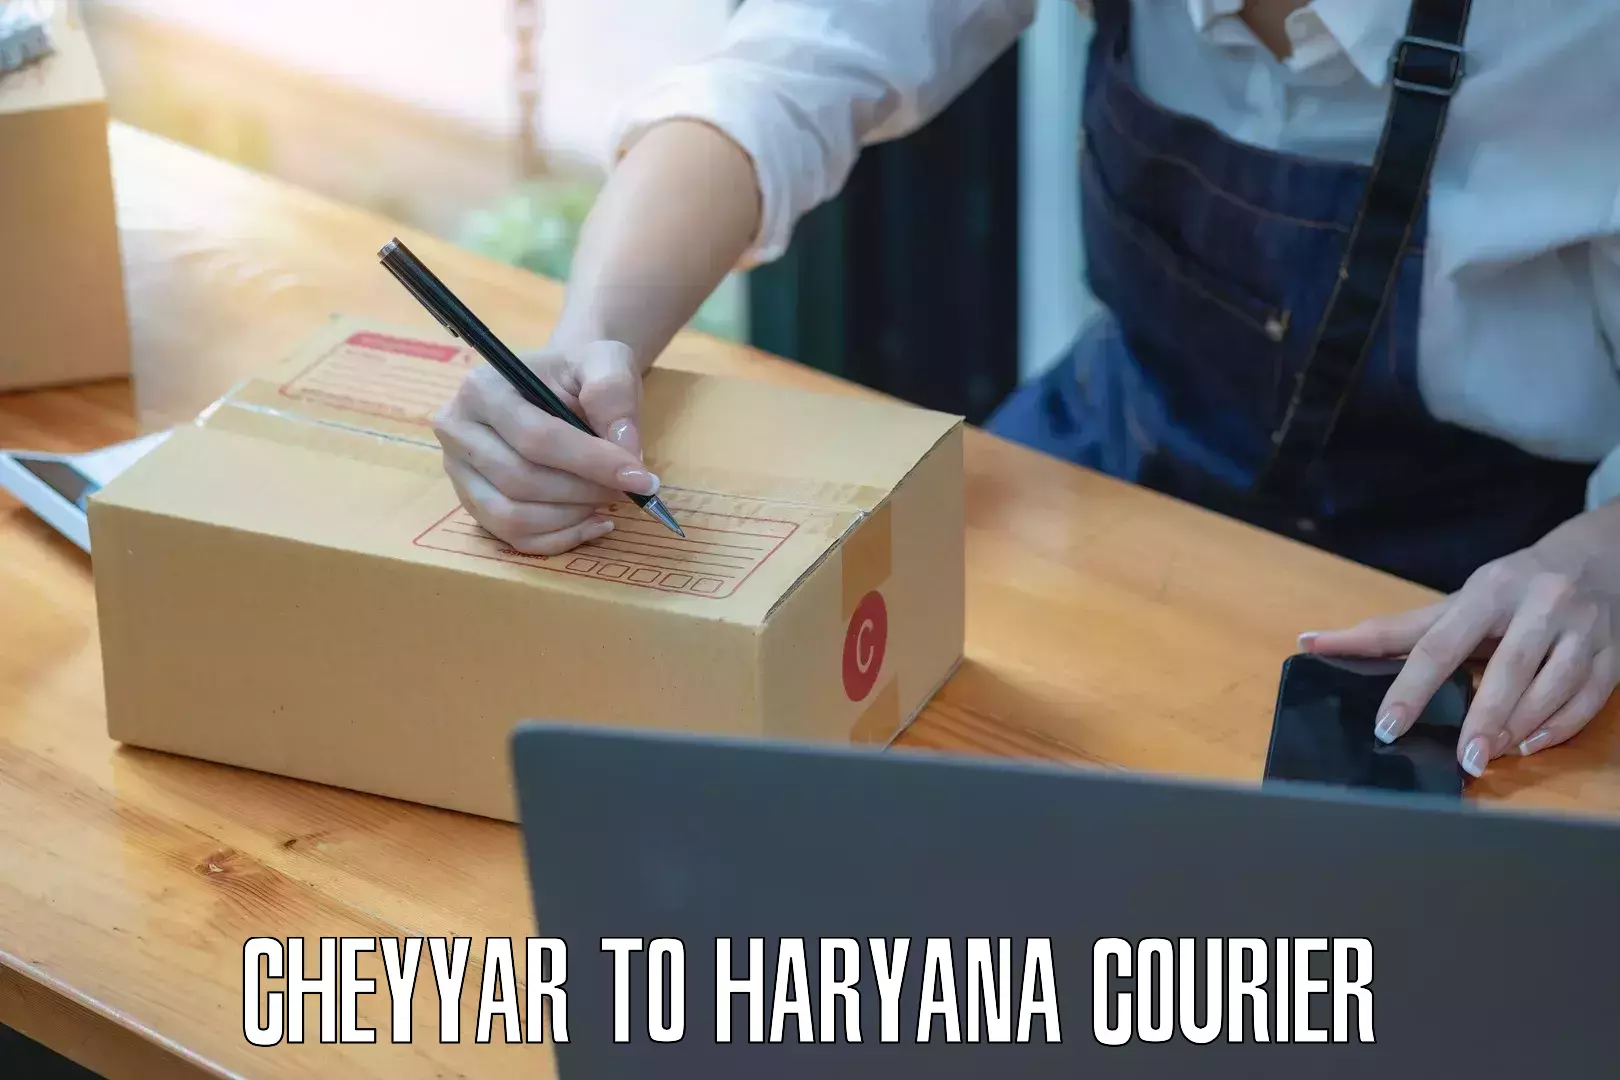 24/7 courier service Cheyyar to Haryana